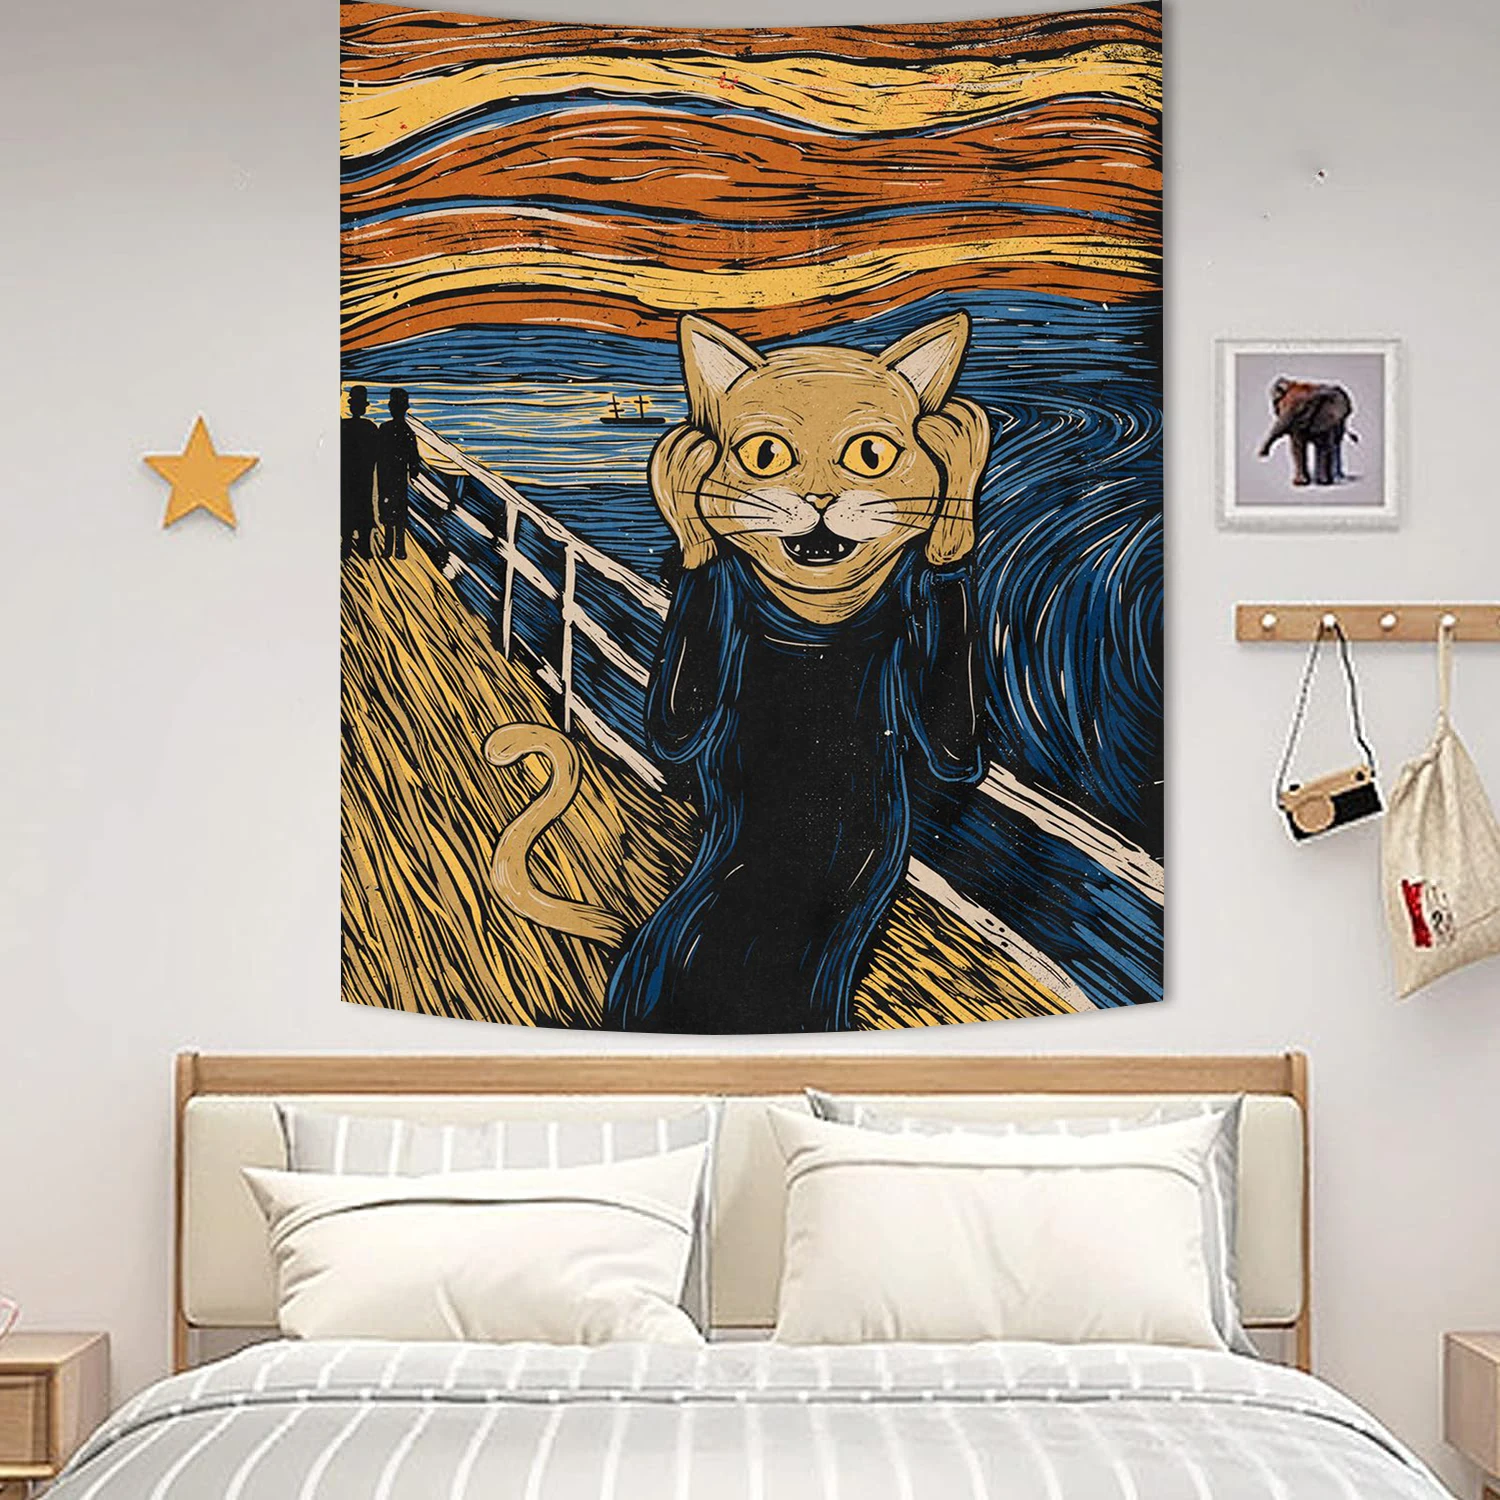 

Tarot Cat Tapestry Aesthetic Room Decoration Wall Decor Tapestries Tapries Decors Home Bedroom Fabric Hanging the Decorative Art